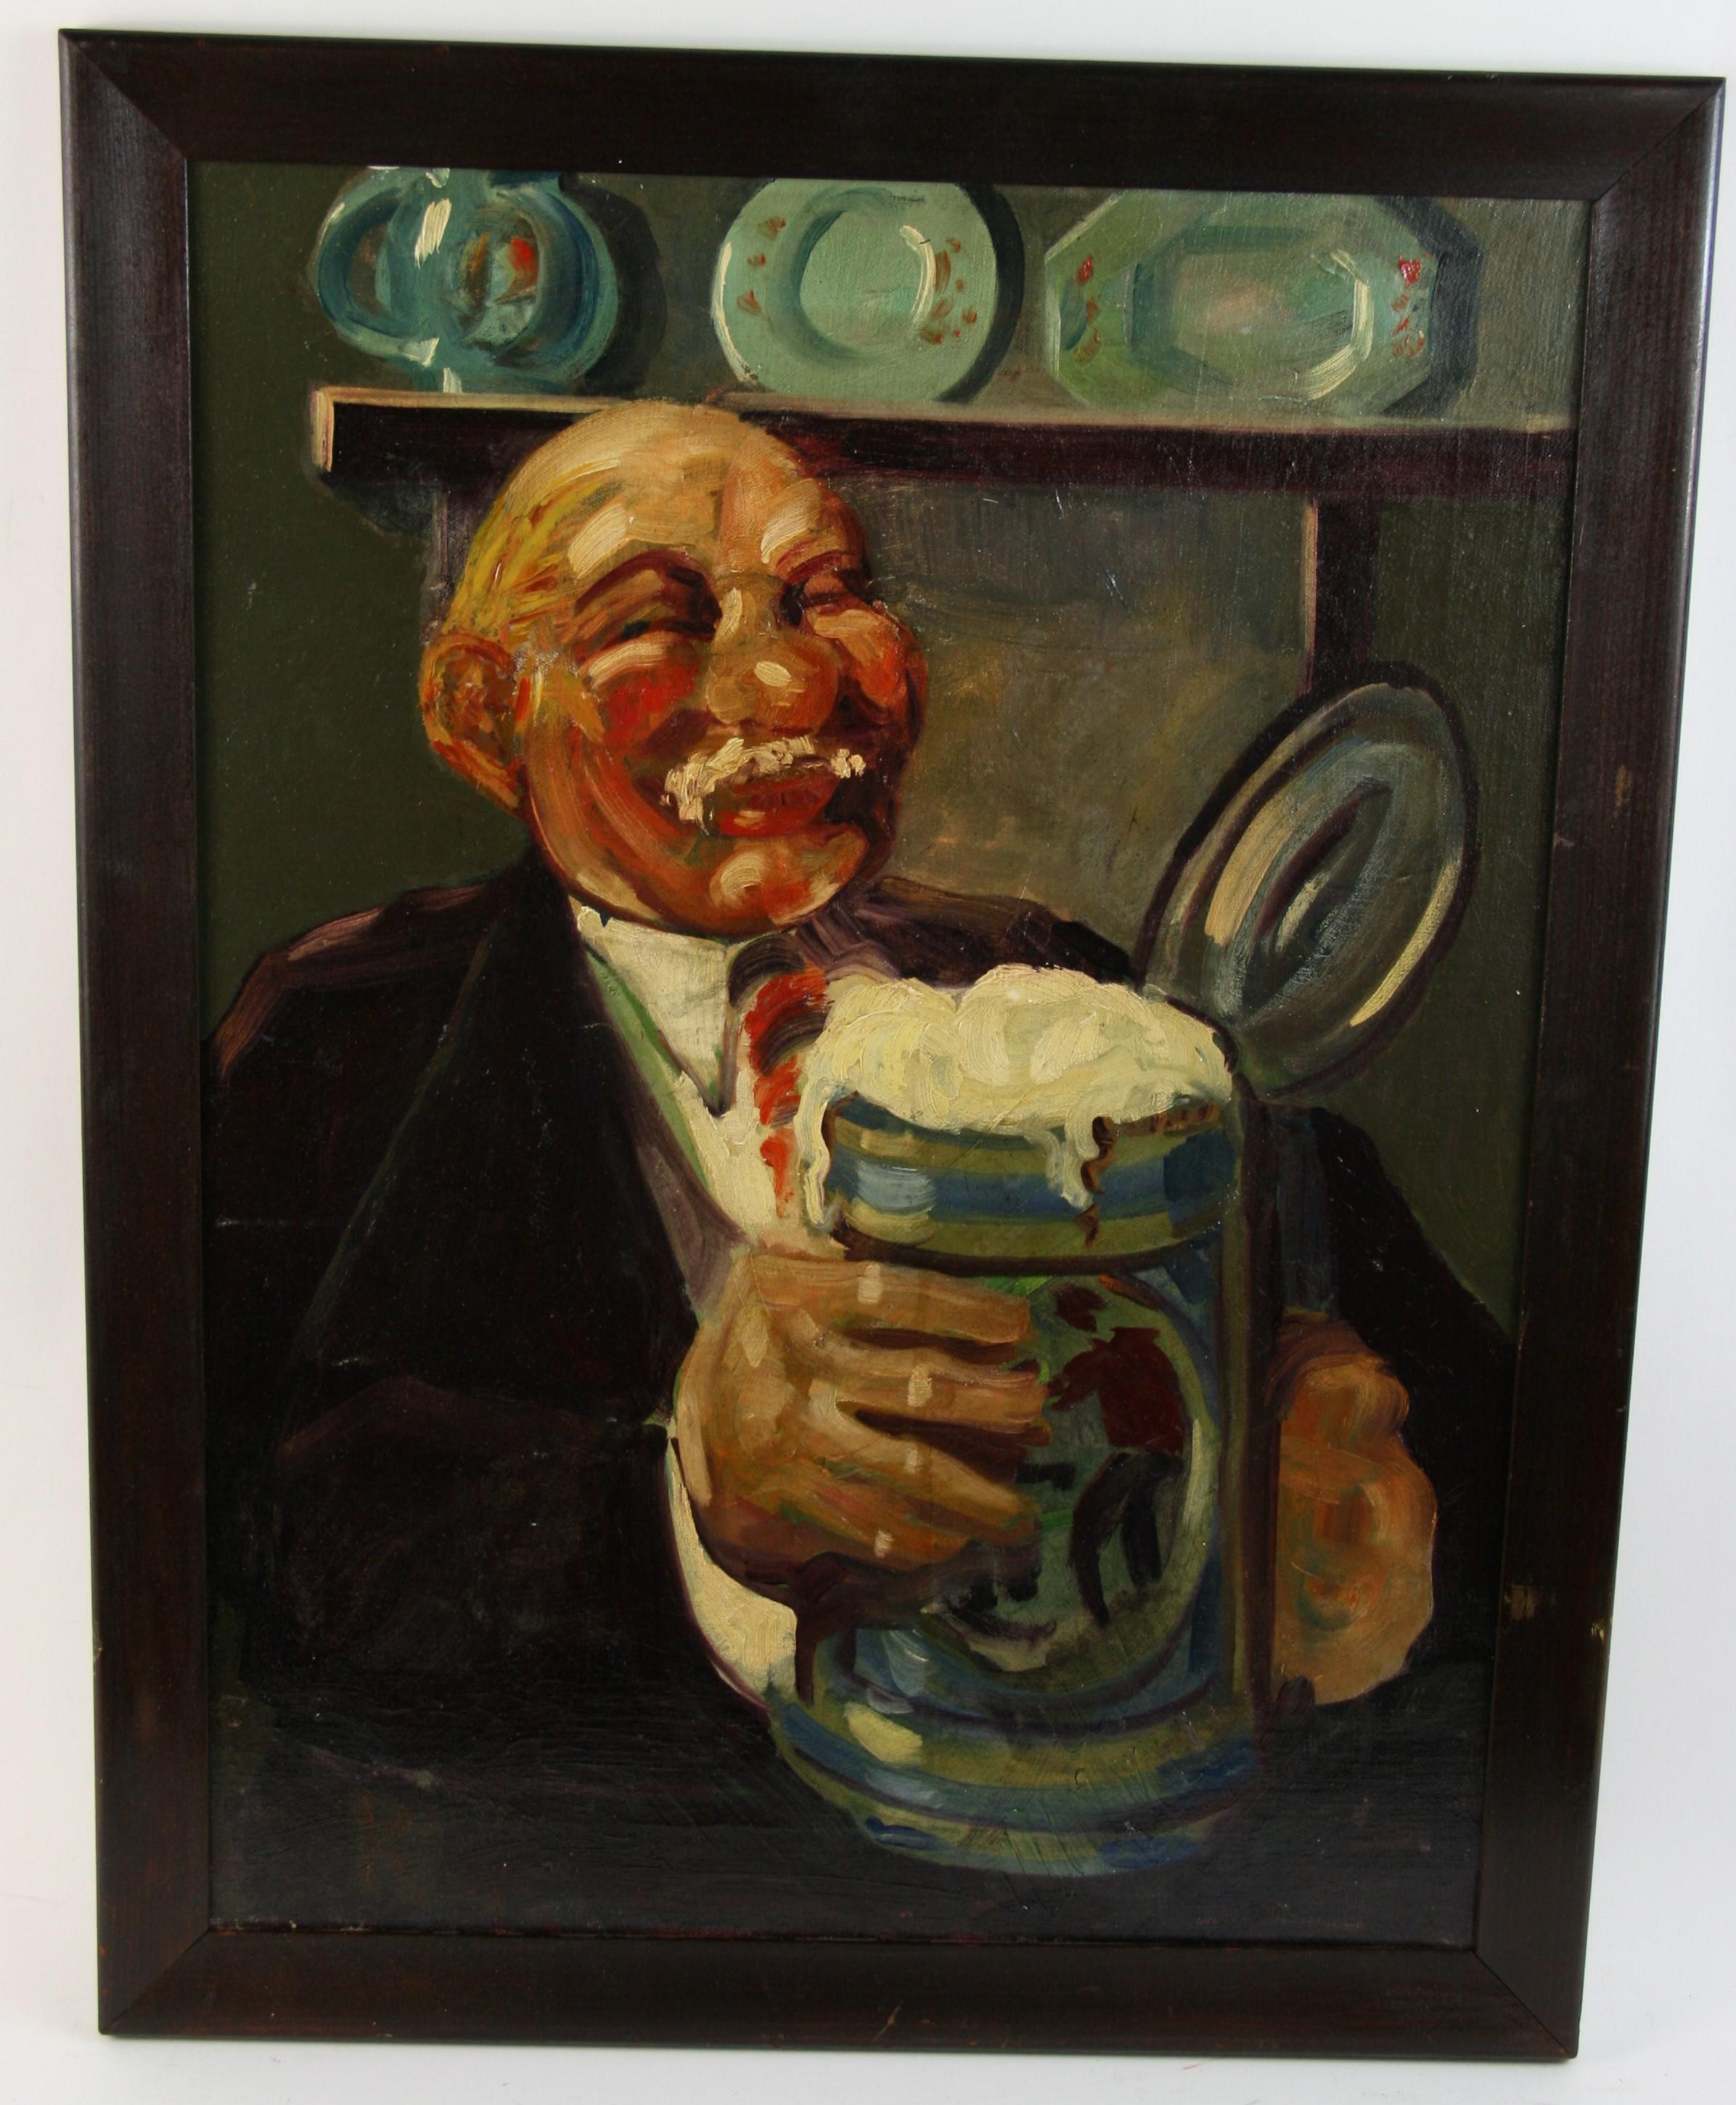 Unknown Figurative Painting - Antique English  Beer Drinker  Figurative Pub Interior Scene Oil  Painting 1940